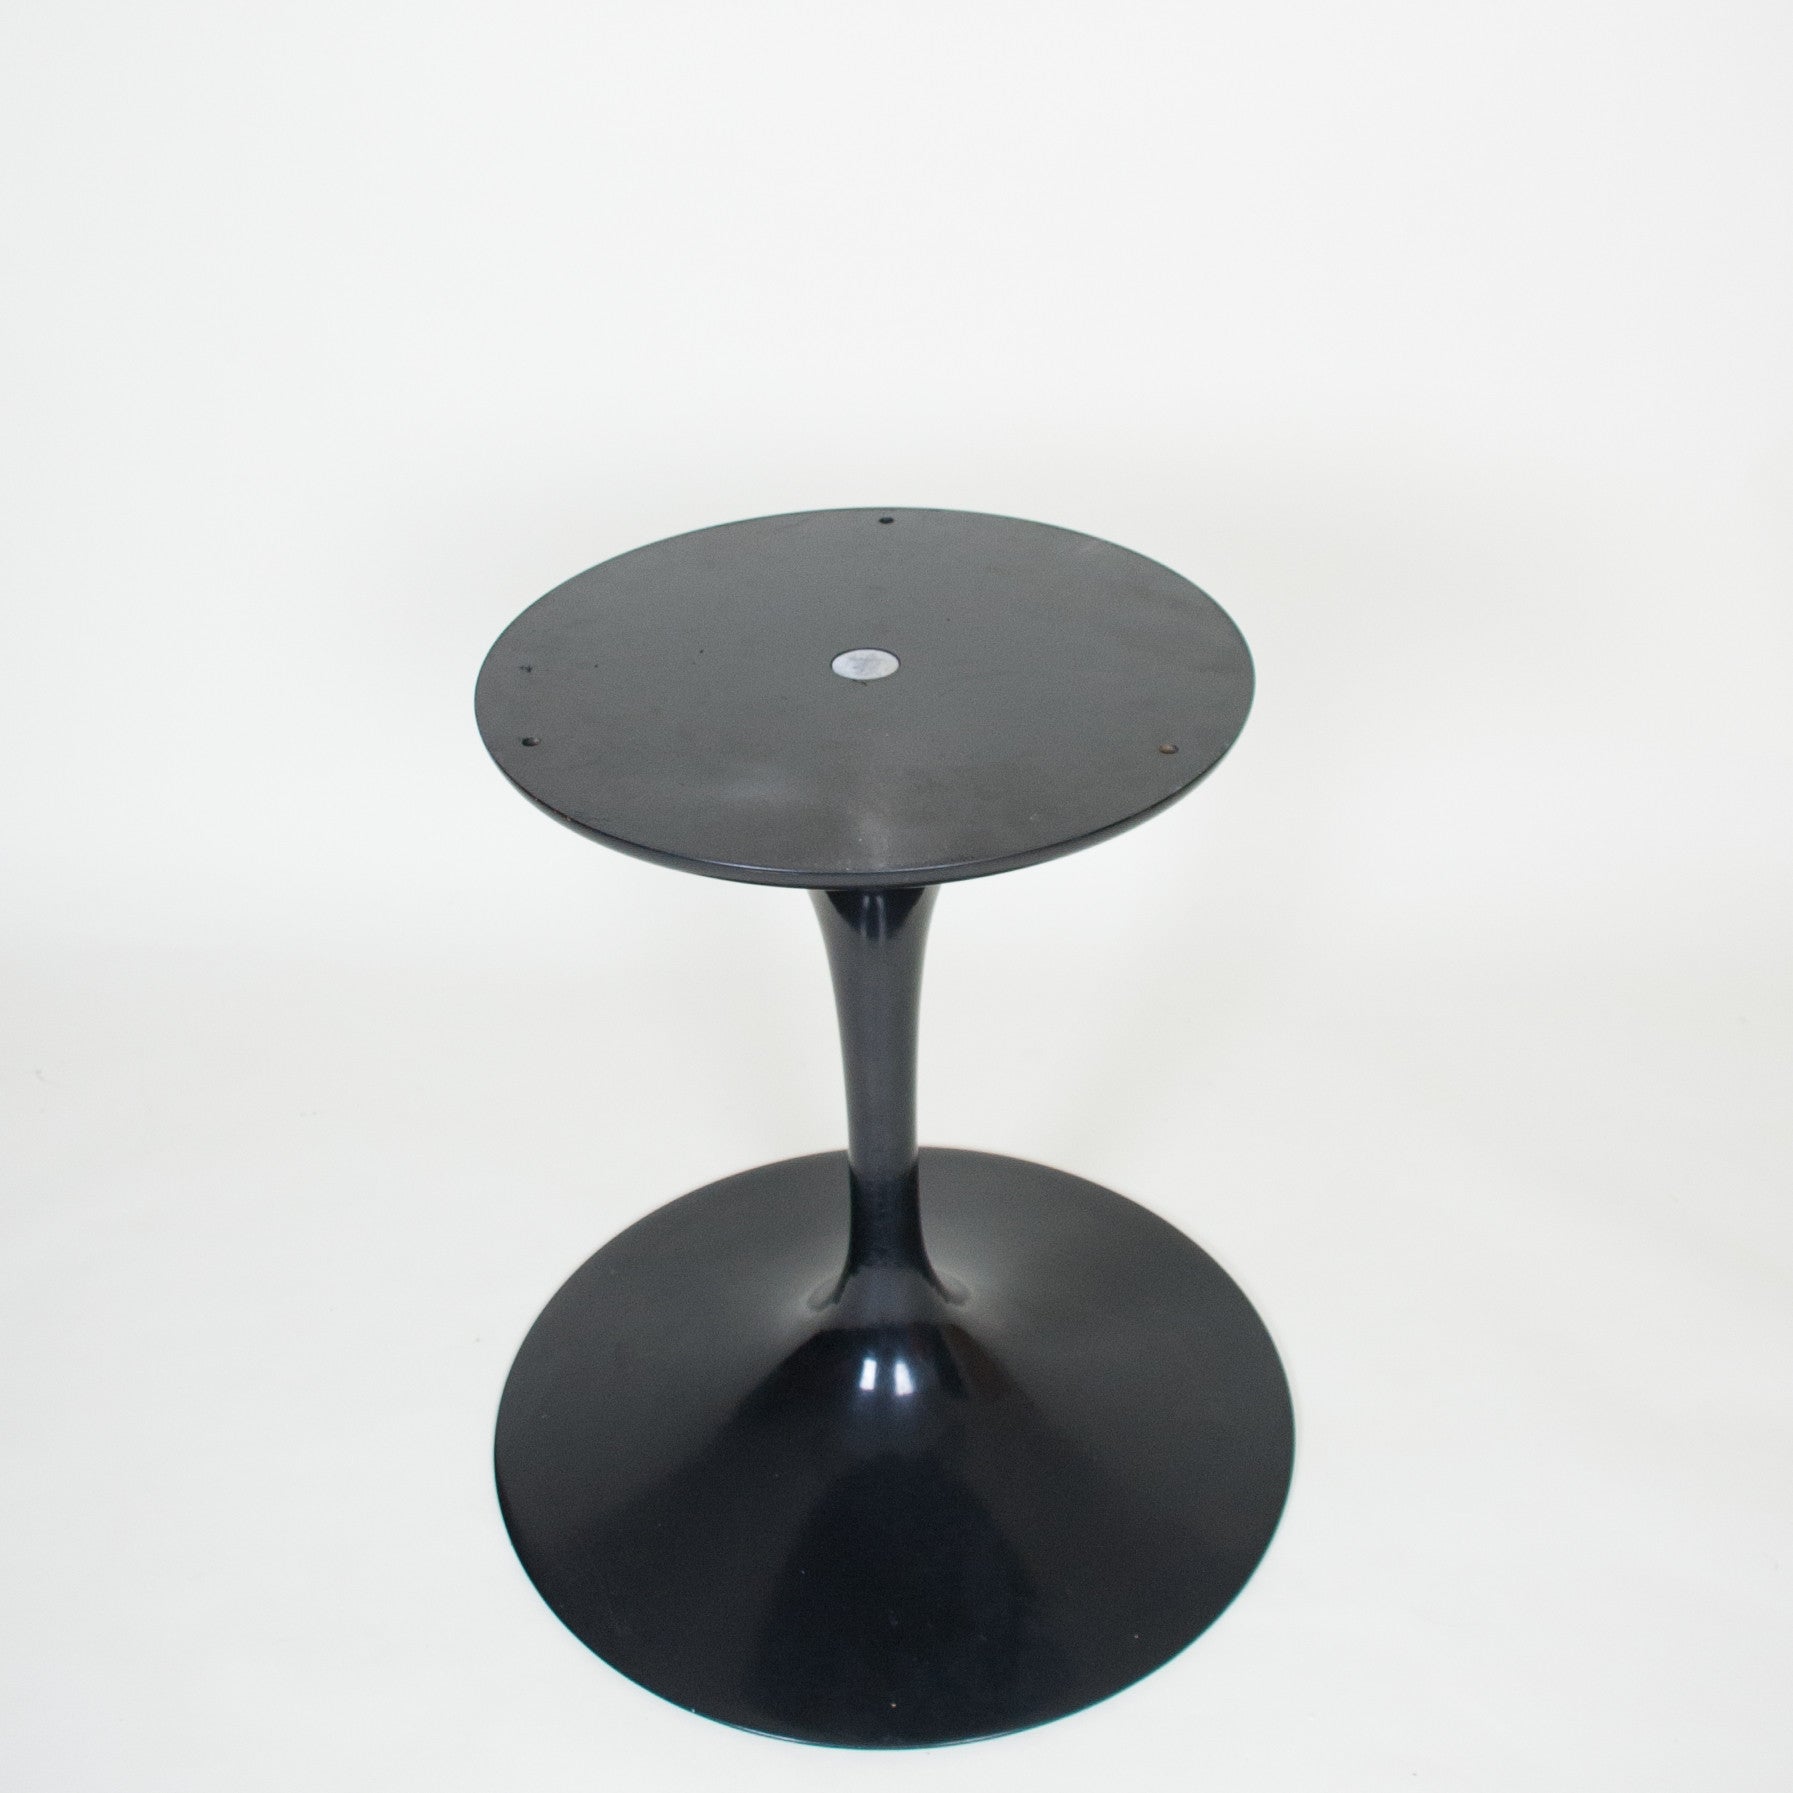 SOLD Eero Saarinen For Knoll 54 Inch Tulip Conference / Dining Table Granite, Like New!